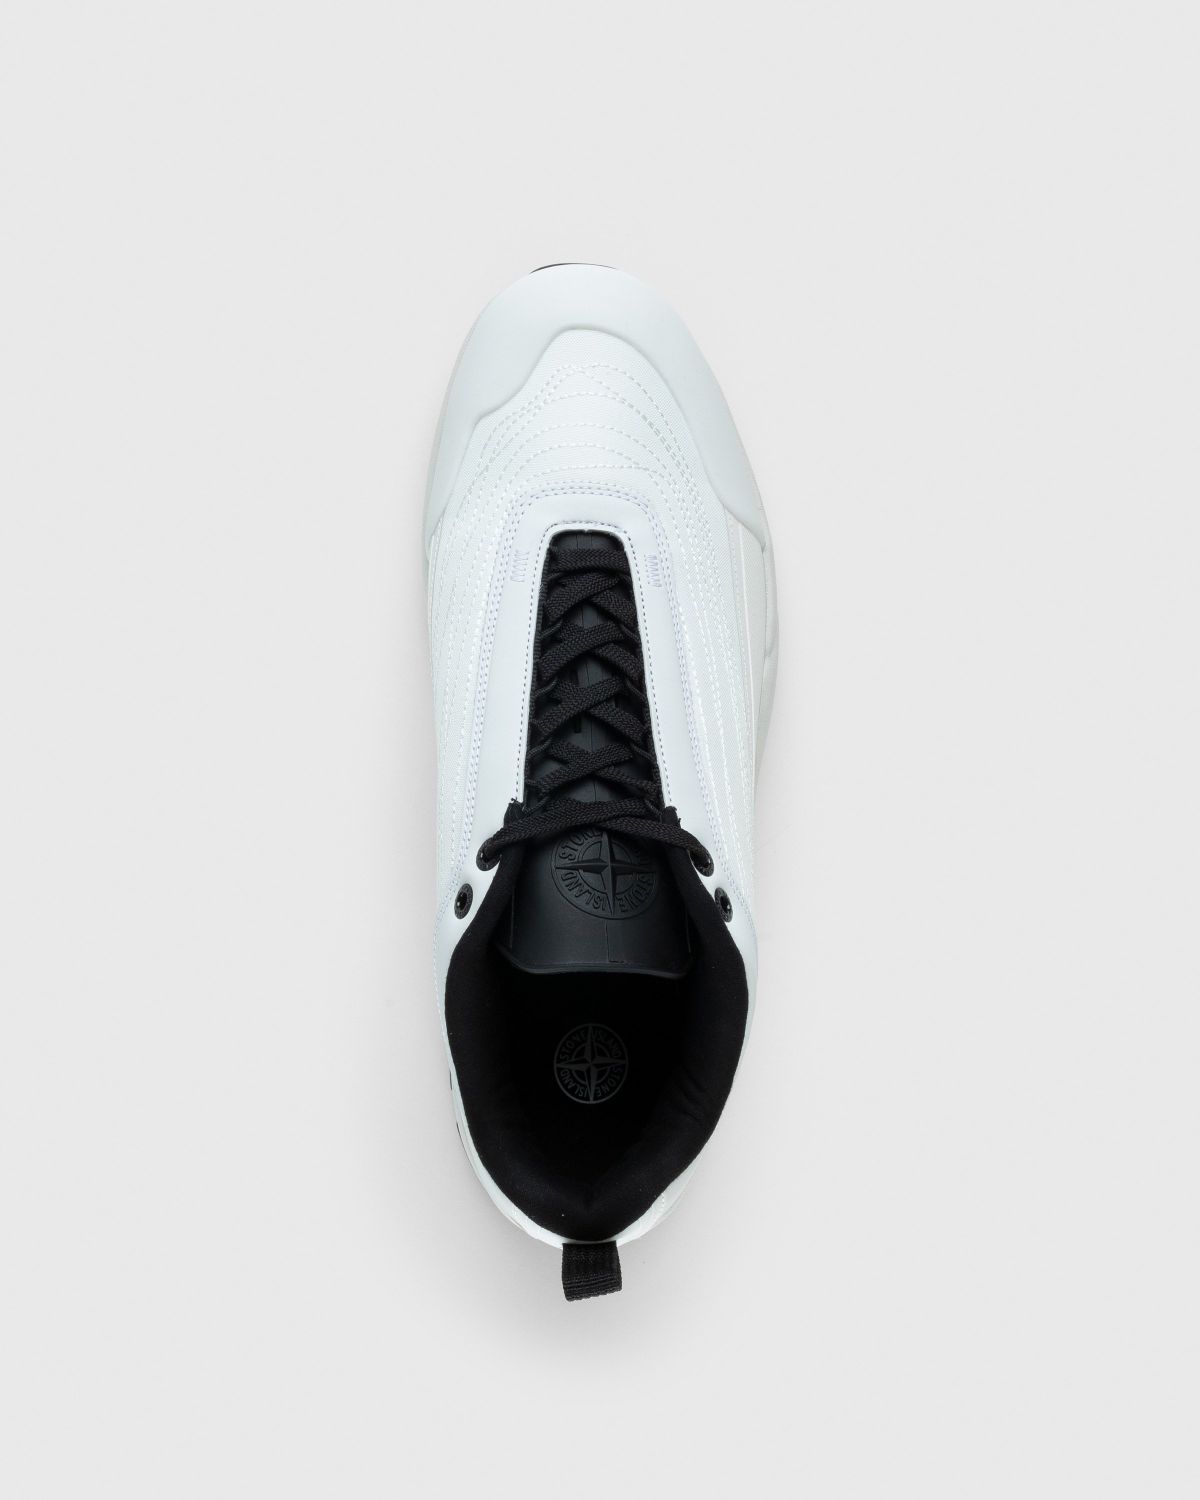 Stone Island – Grime Sneaker White - Low Top Sneakers - White - Image 6